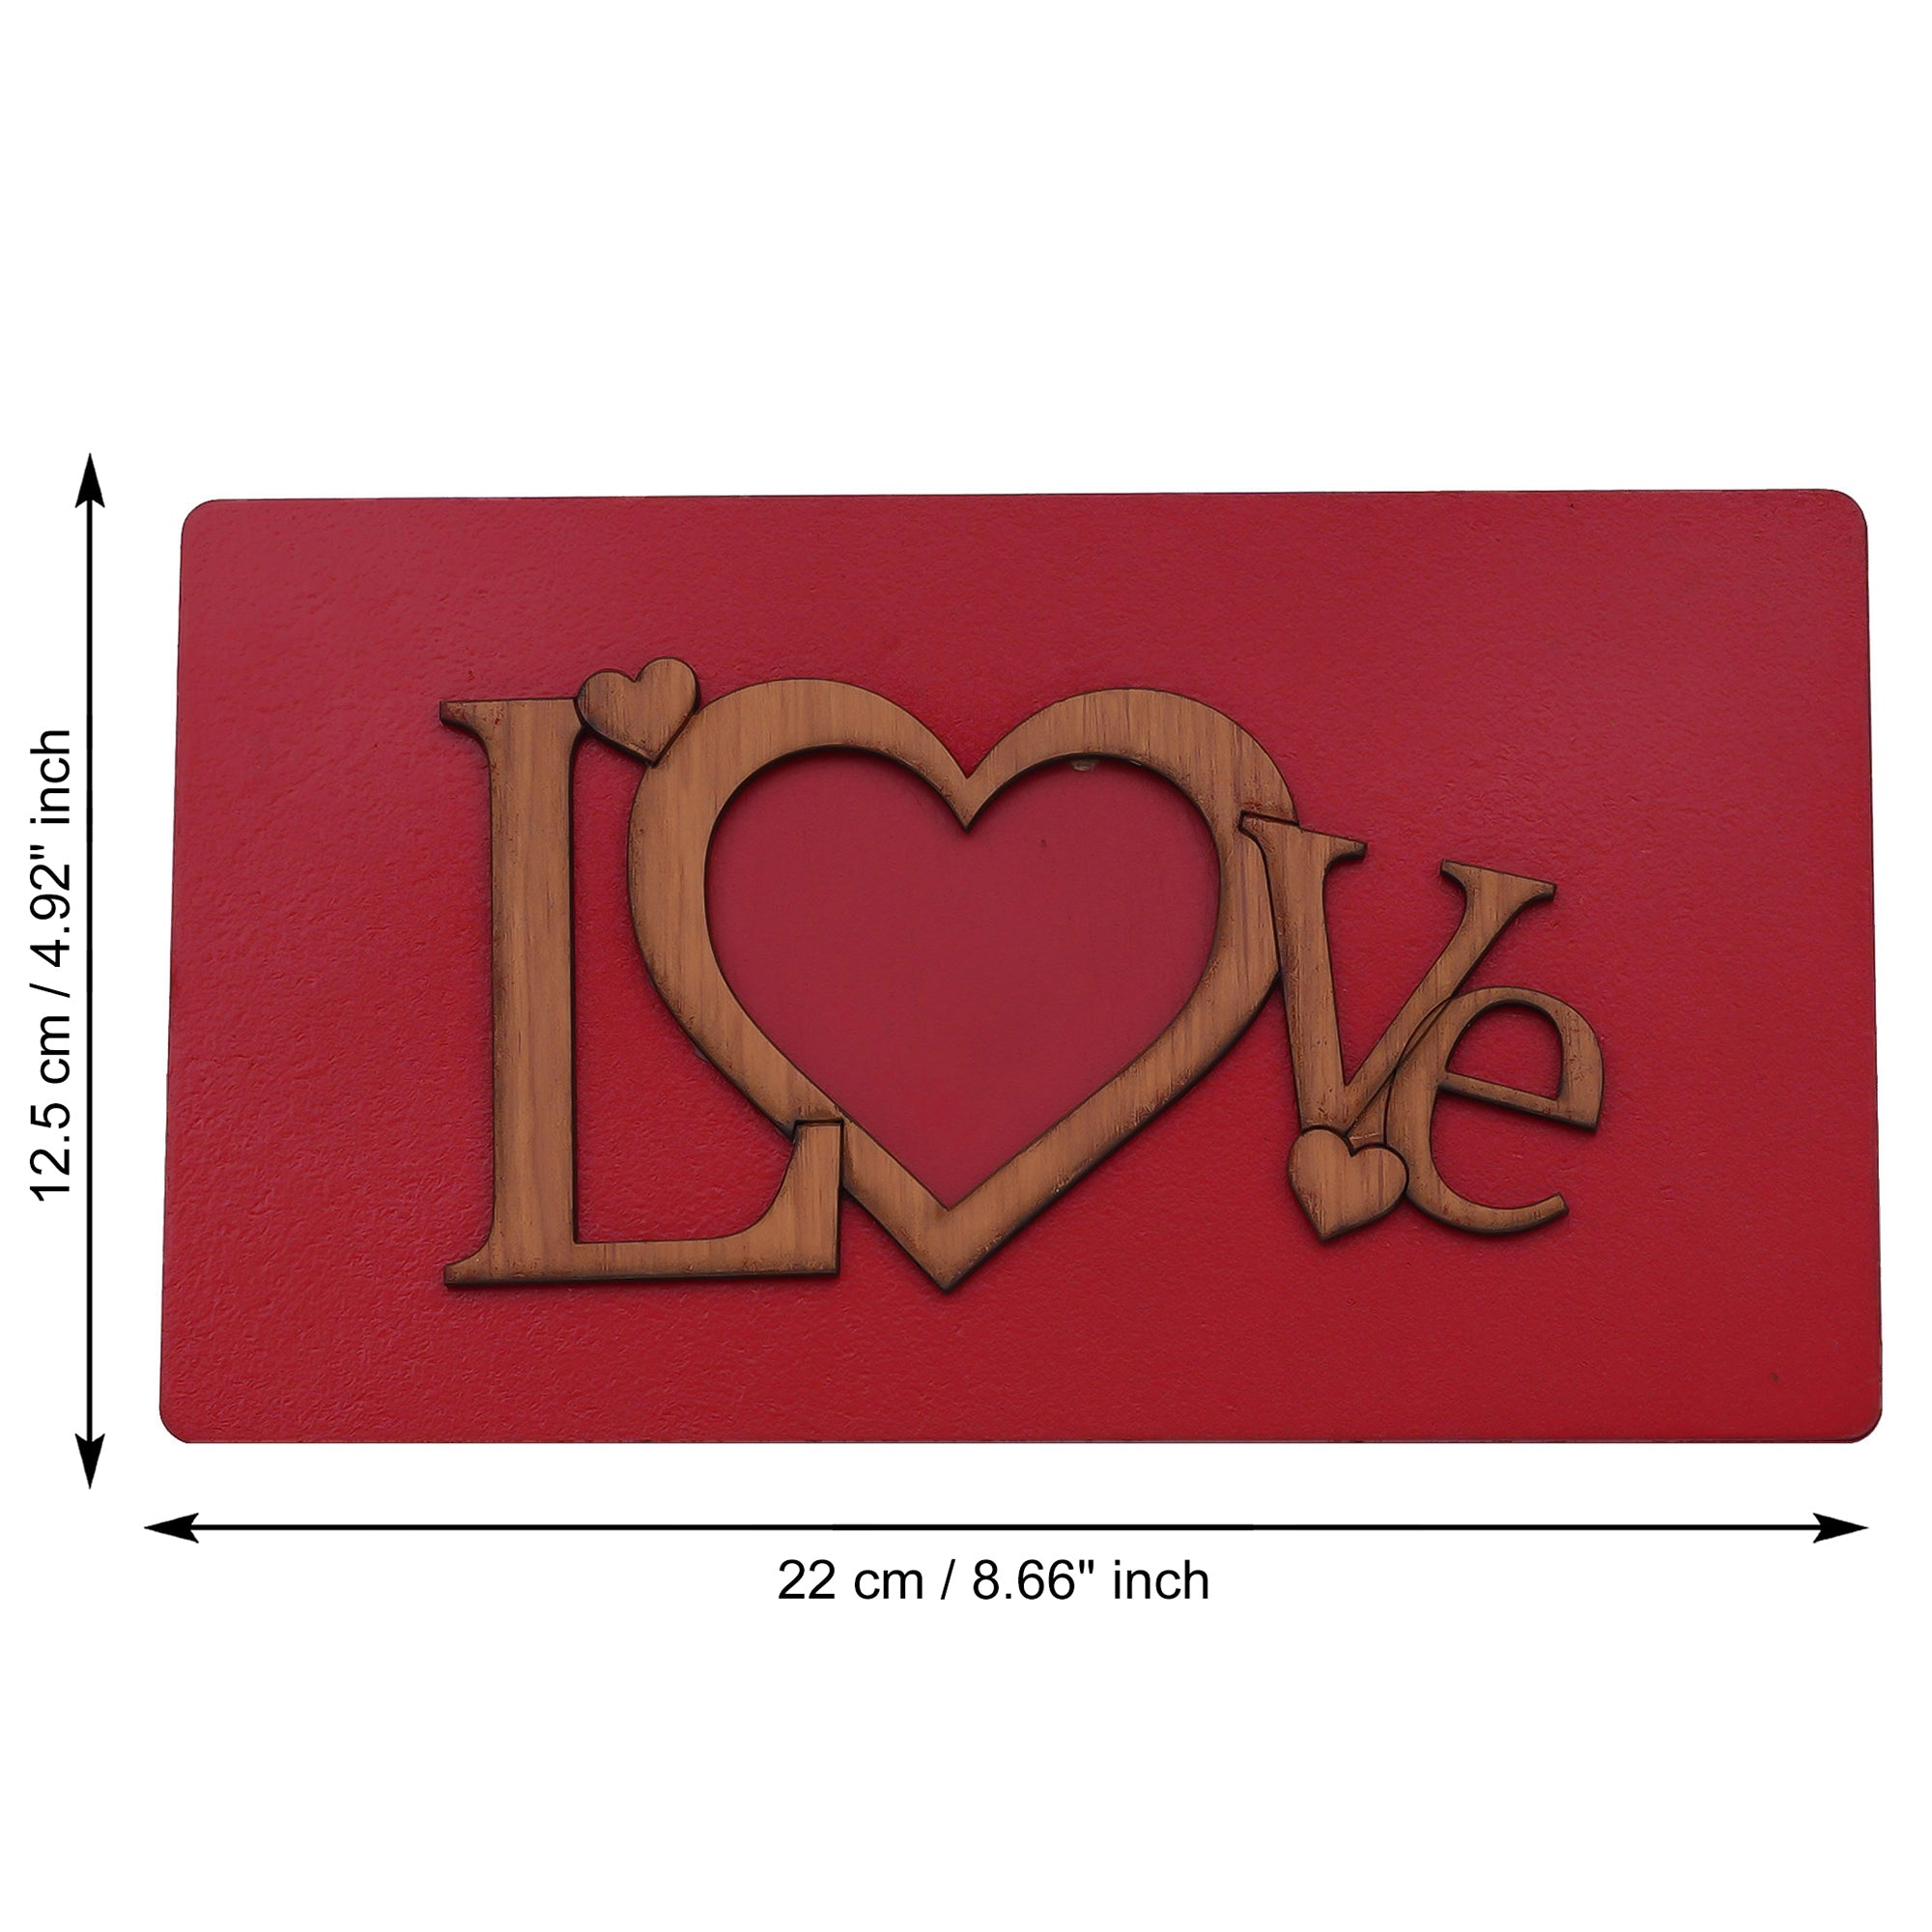 Valentine Combo of Golden Red Rose Gift Set, "Love" Wooden Photo Frame With Red Stand, Bride Kissing Groom Romantic Polyresin Decorative Showpiece 4